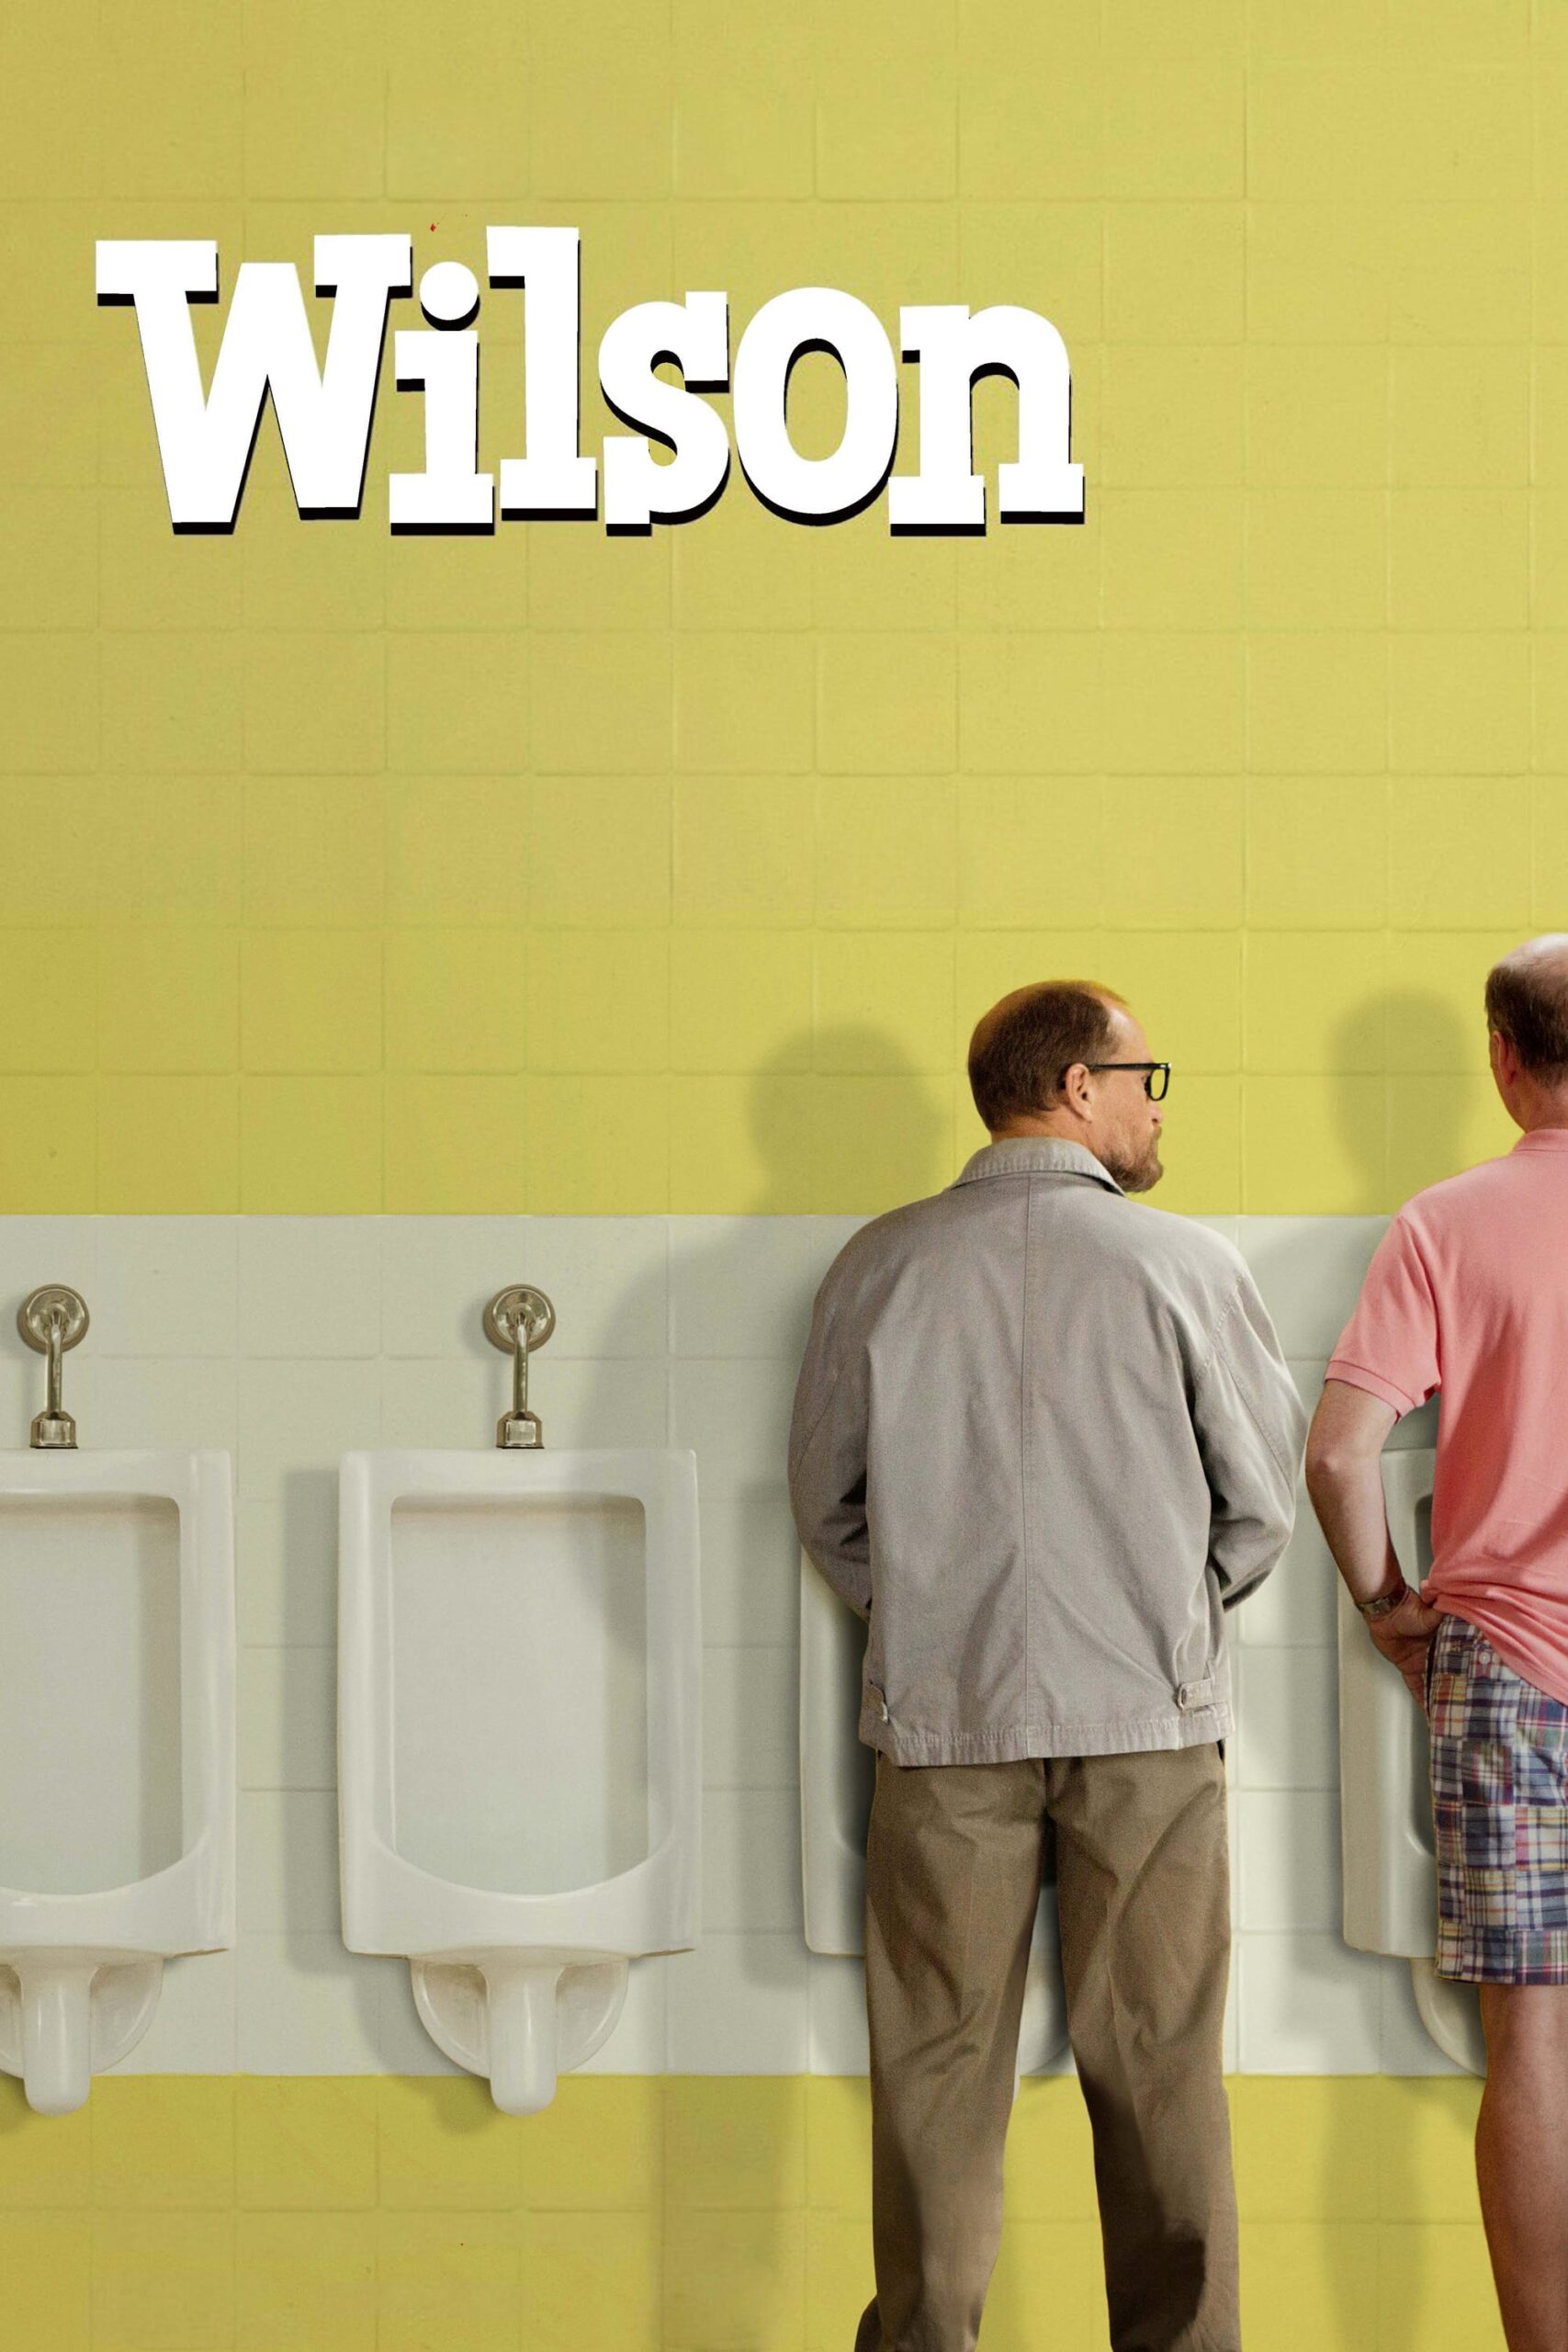 Poster for the movie "Wilson"